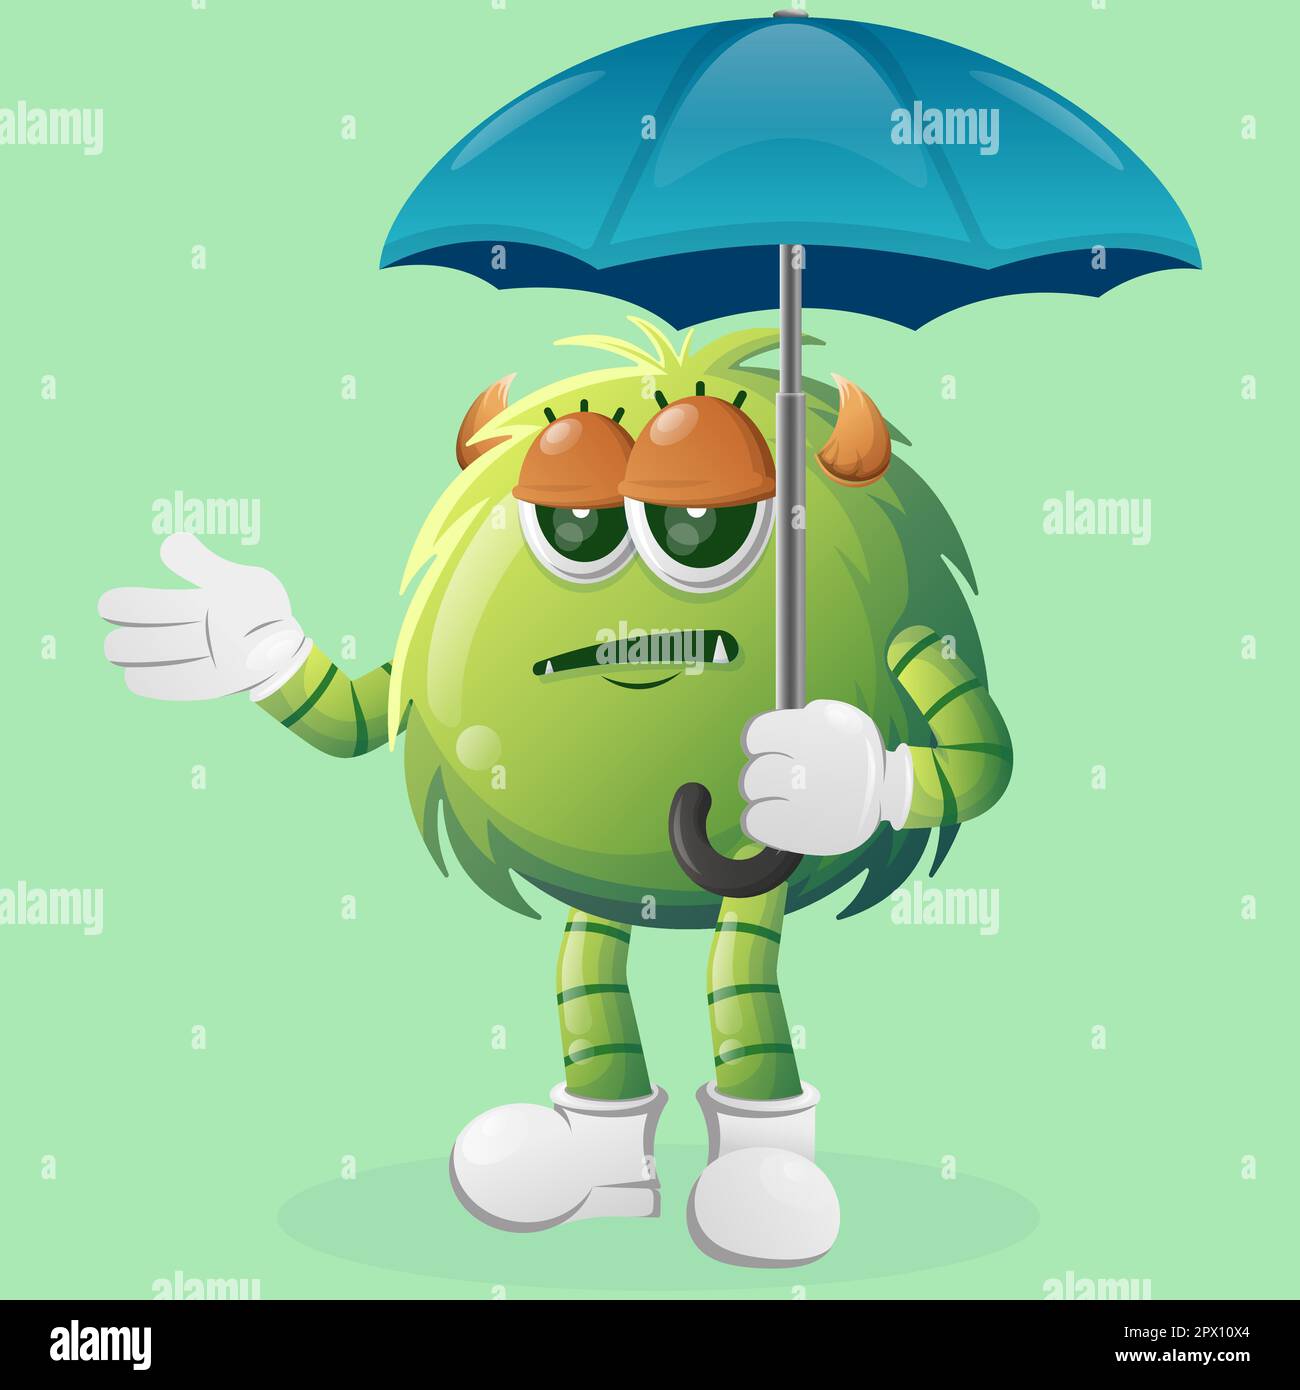 Cute green monster holding umbrella with boblue expression. Perfect for kids, small business or e-Commerce, merchandise and sticker, banner promotion, Stock Vector